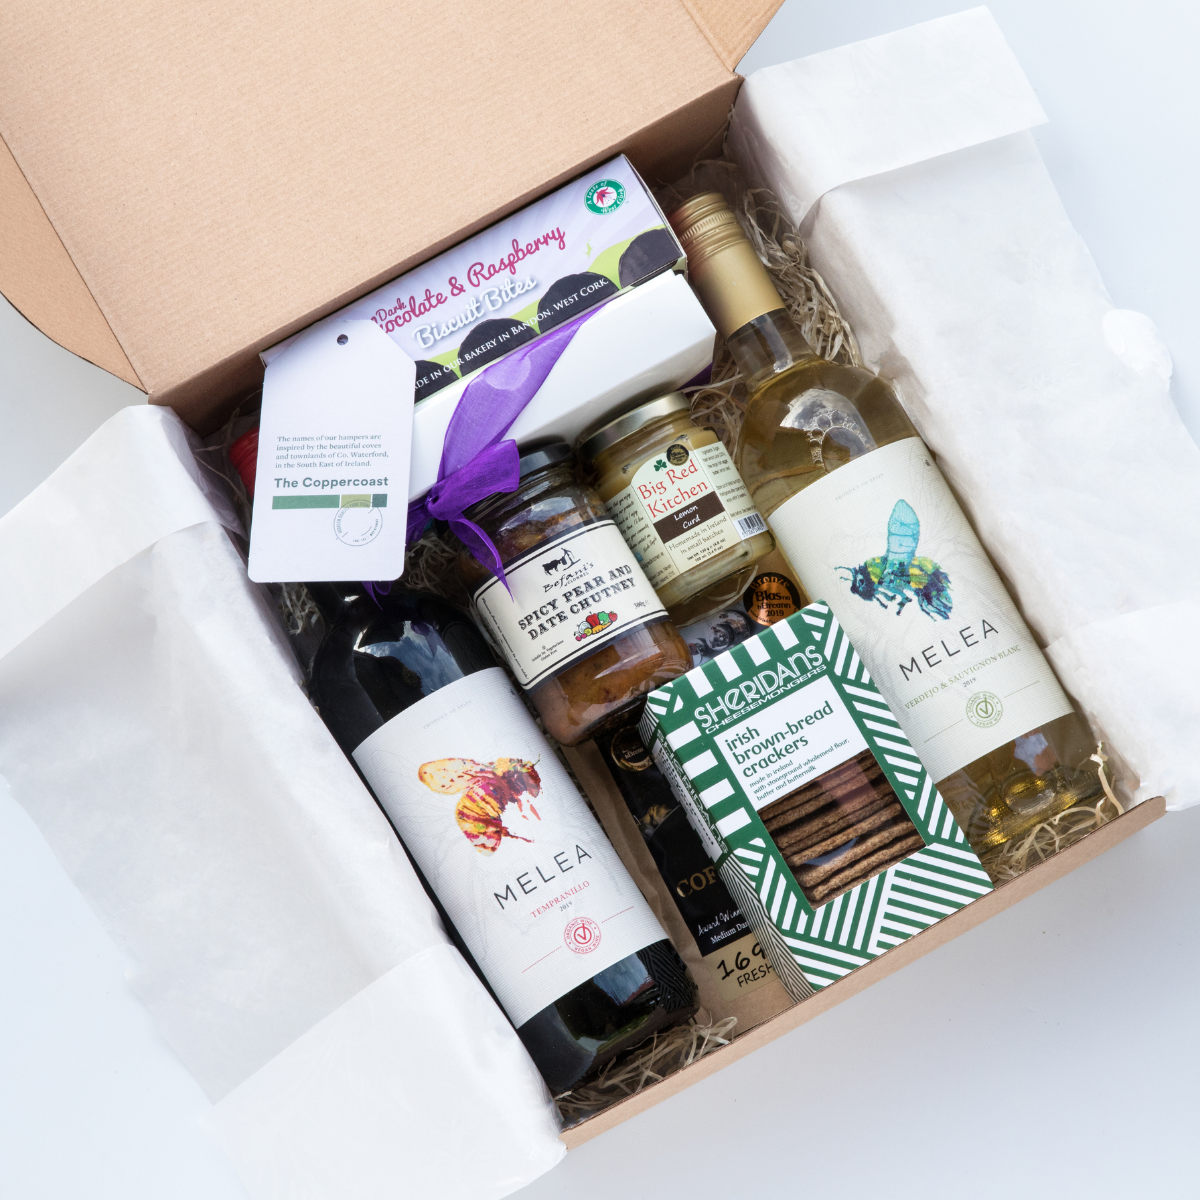 Our Hampers - a brand new look with a sustainable focus